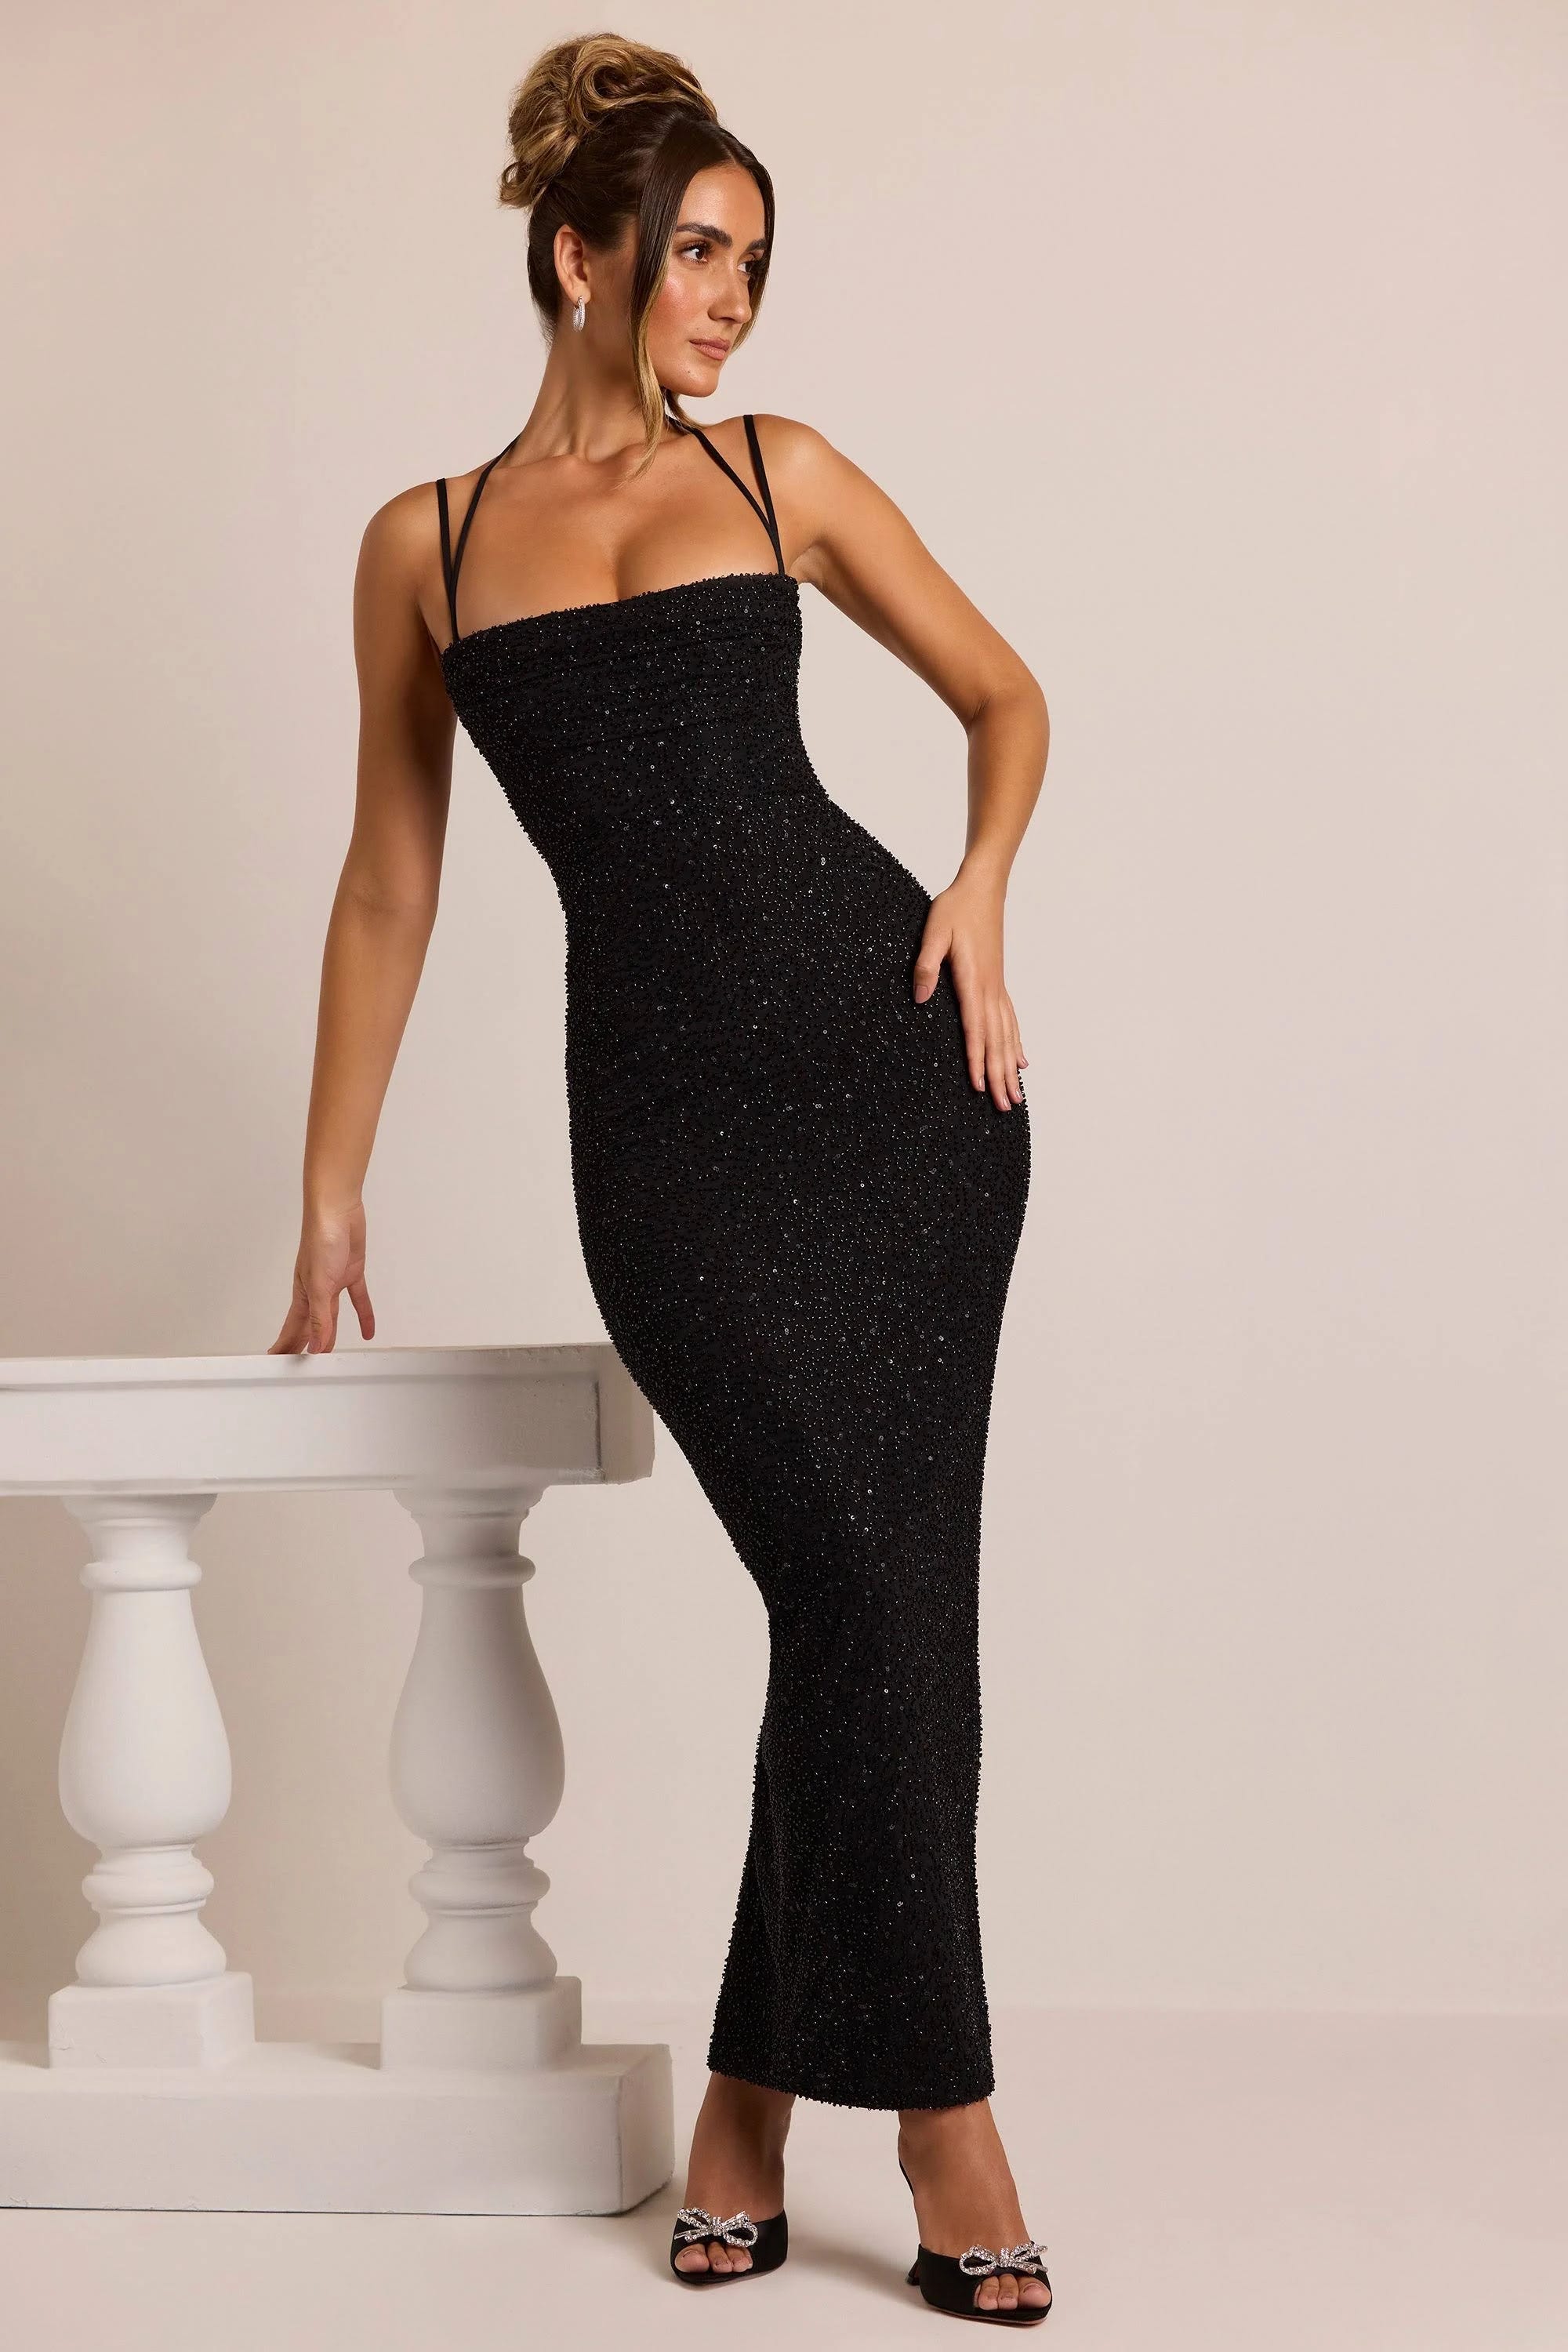 Black Strapless Maxi Dress with Embellished Beading for a Glamorous Evening Look | Image